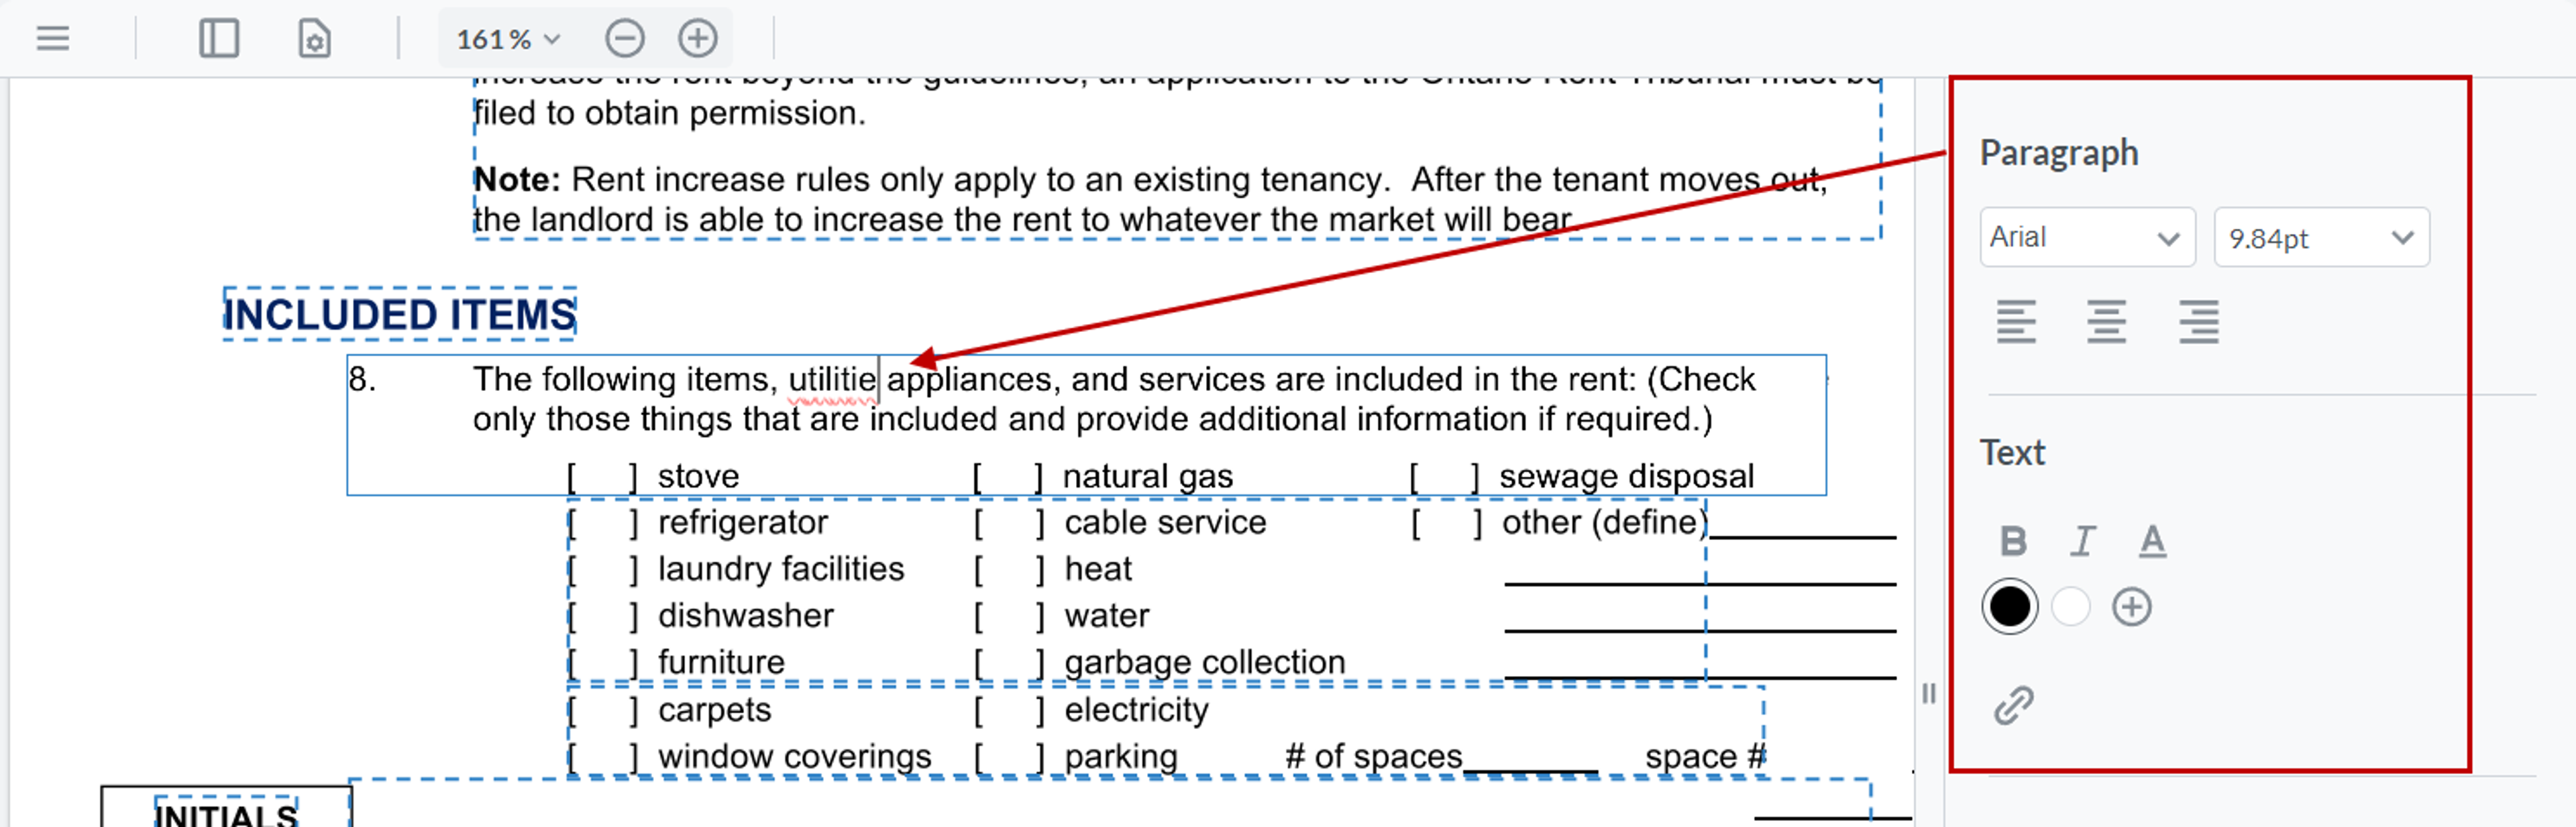 Editing PDF apartment lease agreements